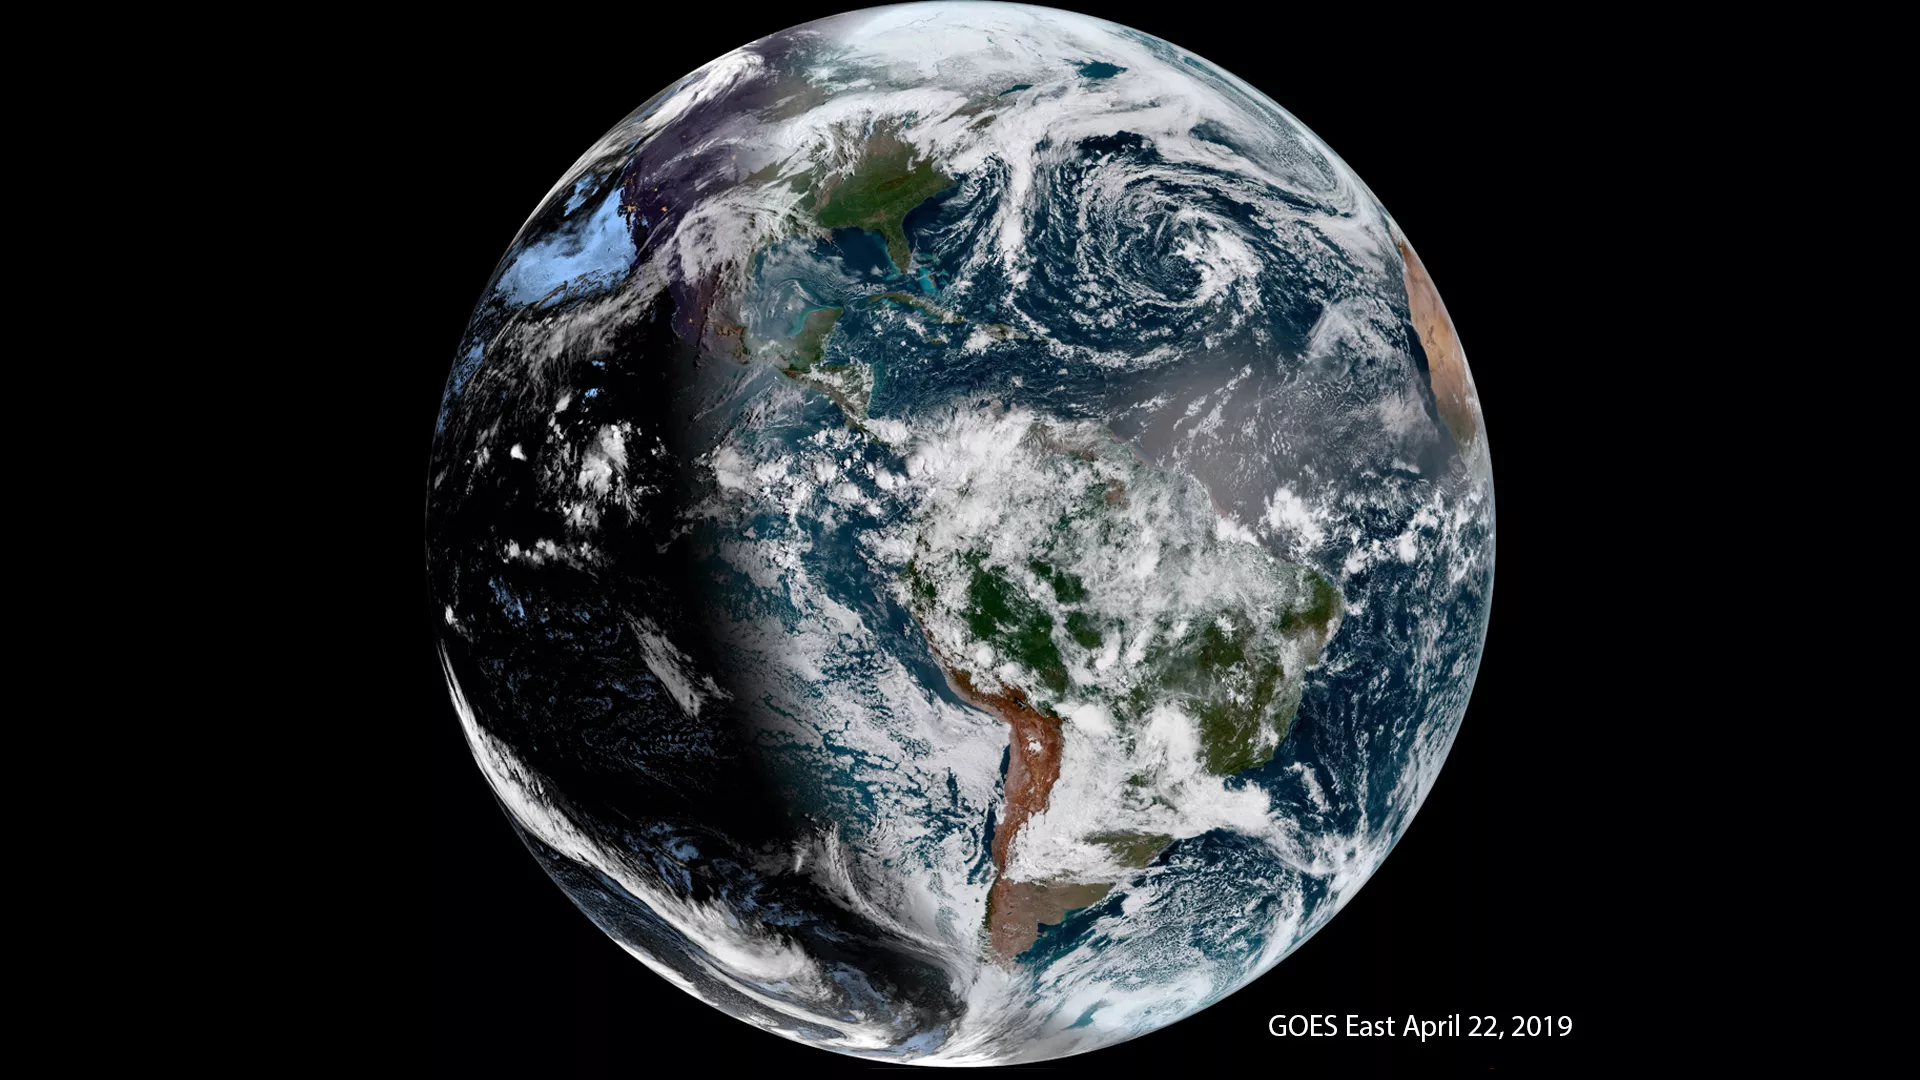 GOES East full-disk view of Earth on April 22, 2019